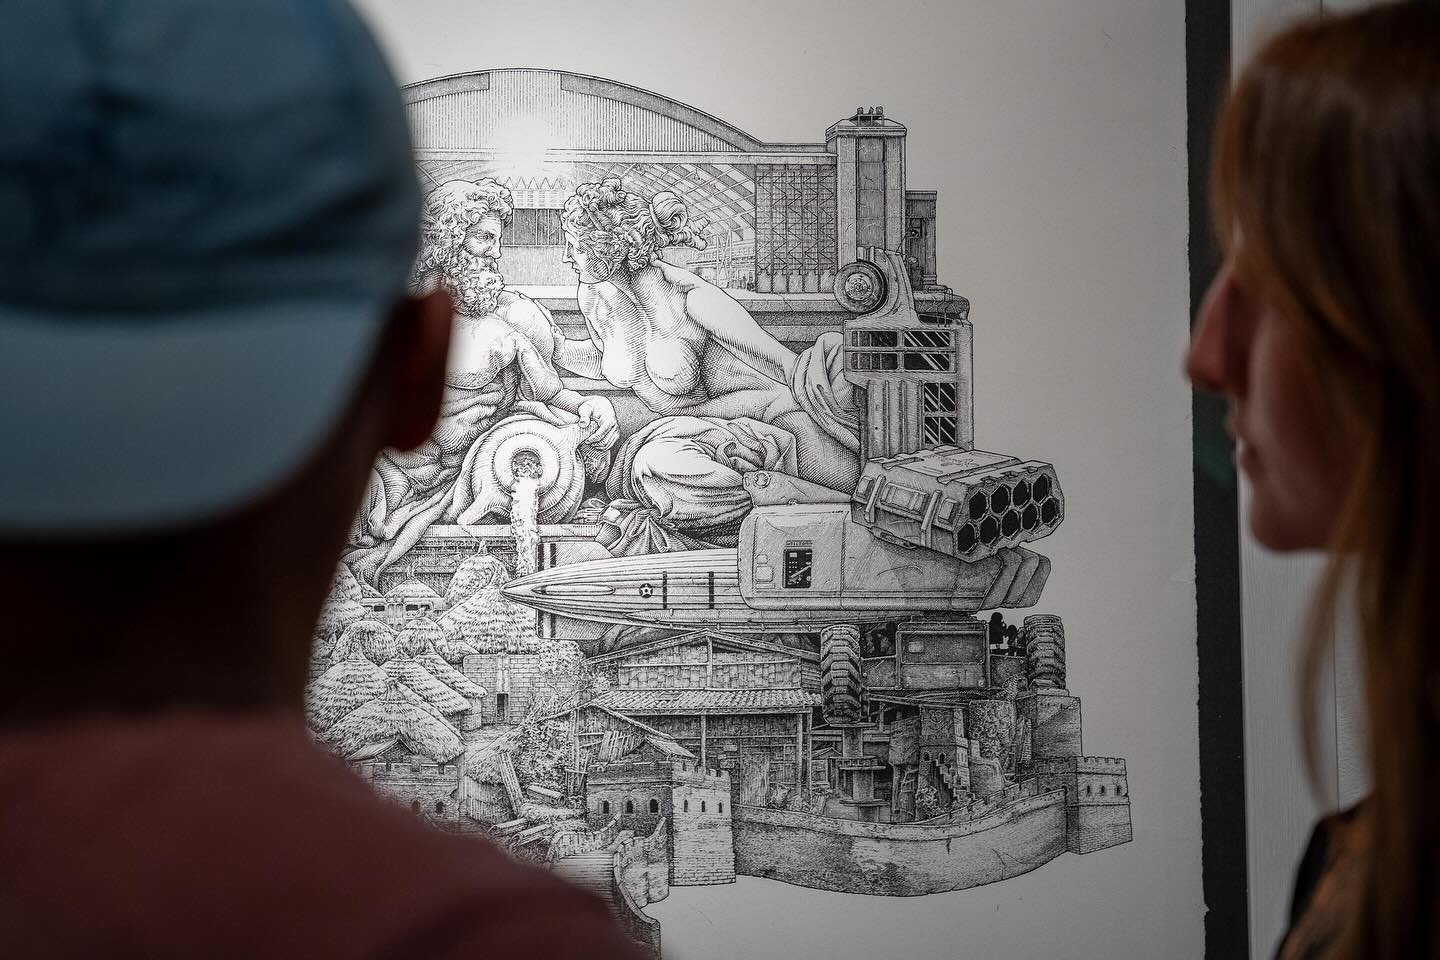 A closer look at @adamwellborn 
&ldquo;Our Progress so Far&rdquo; 
Ink on archival paper
35.5 x 35.5 inches

now on exhibit and available @kailinart 
📸 @visualsage